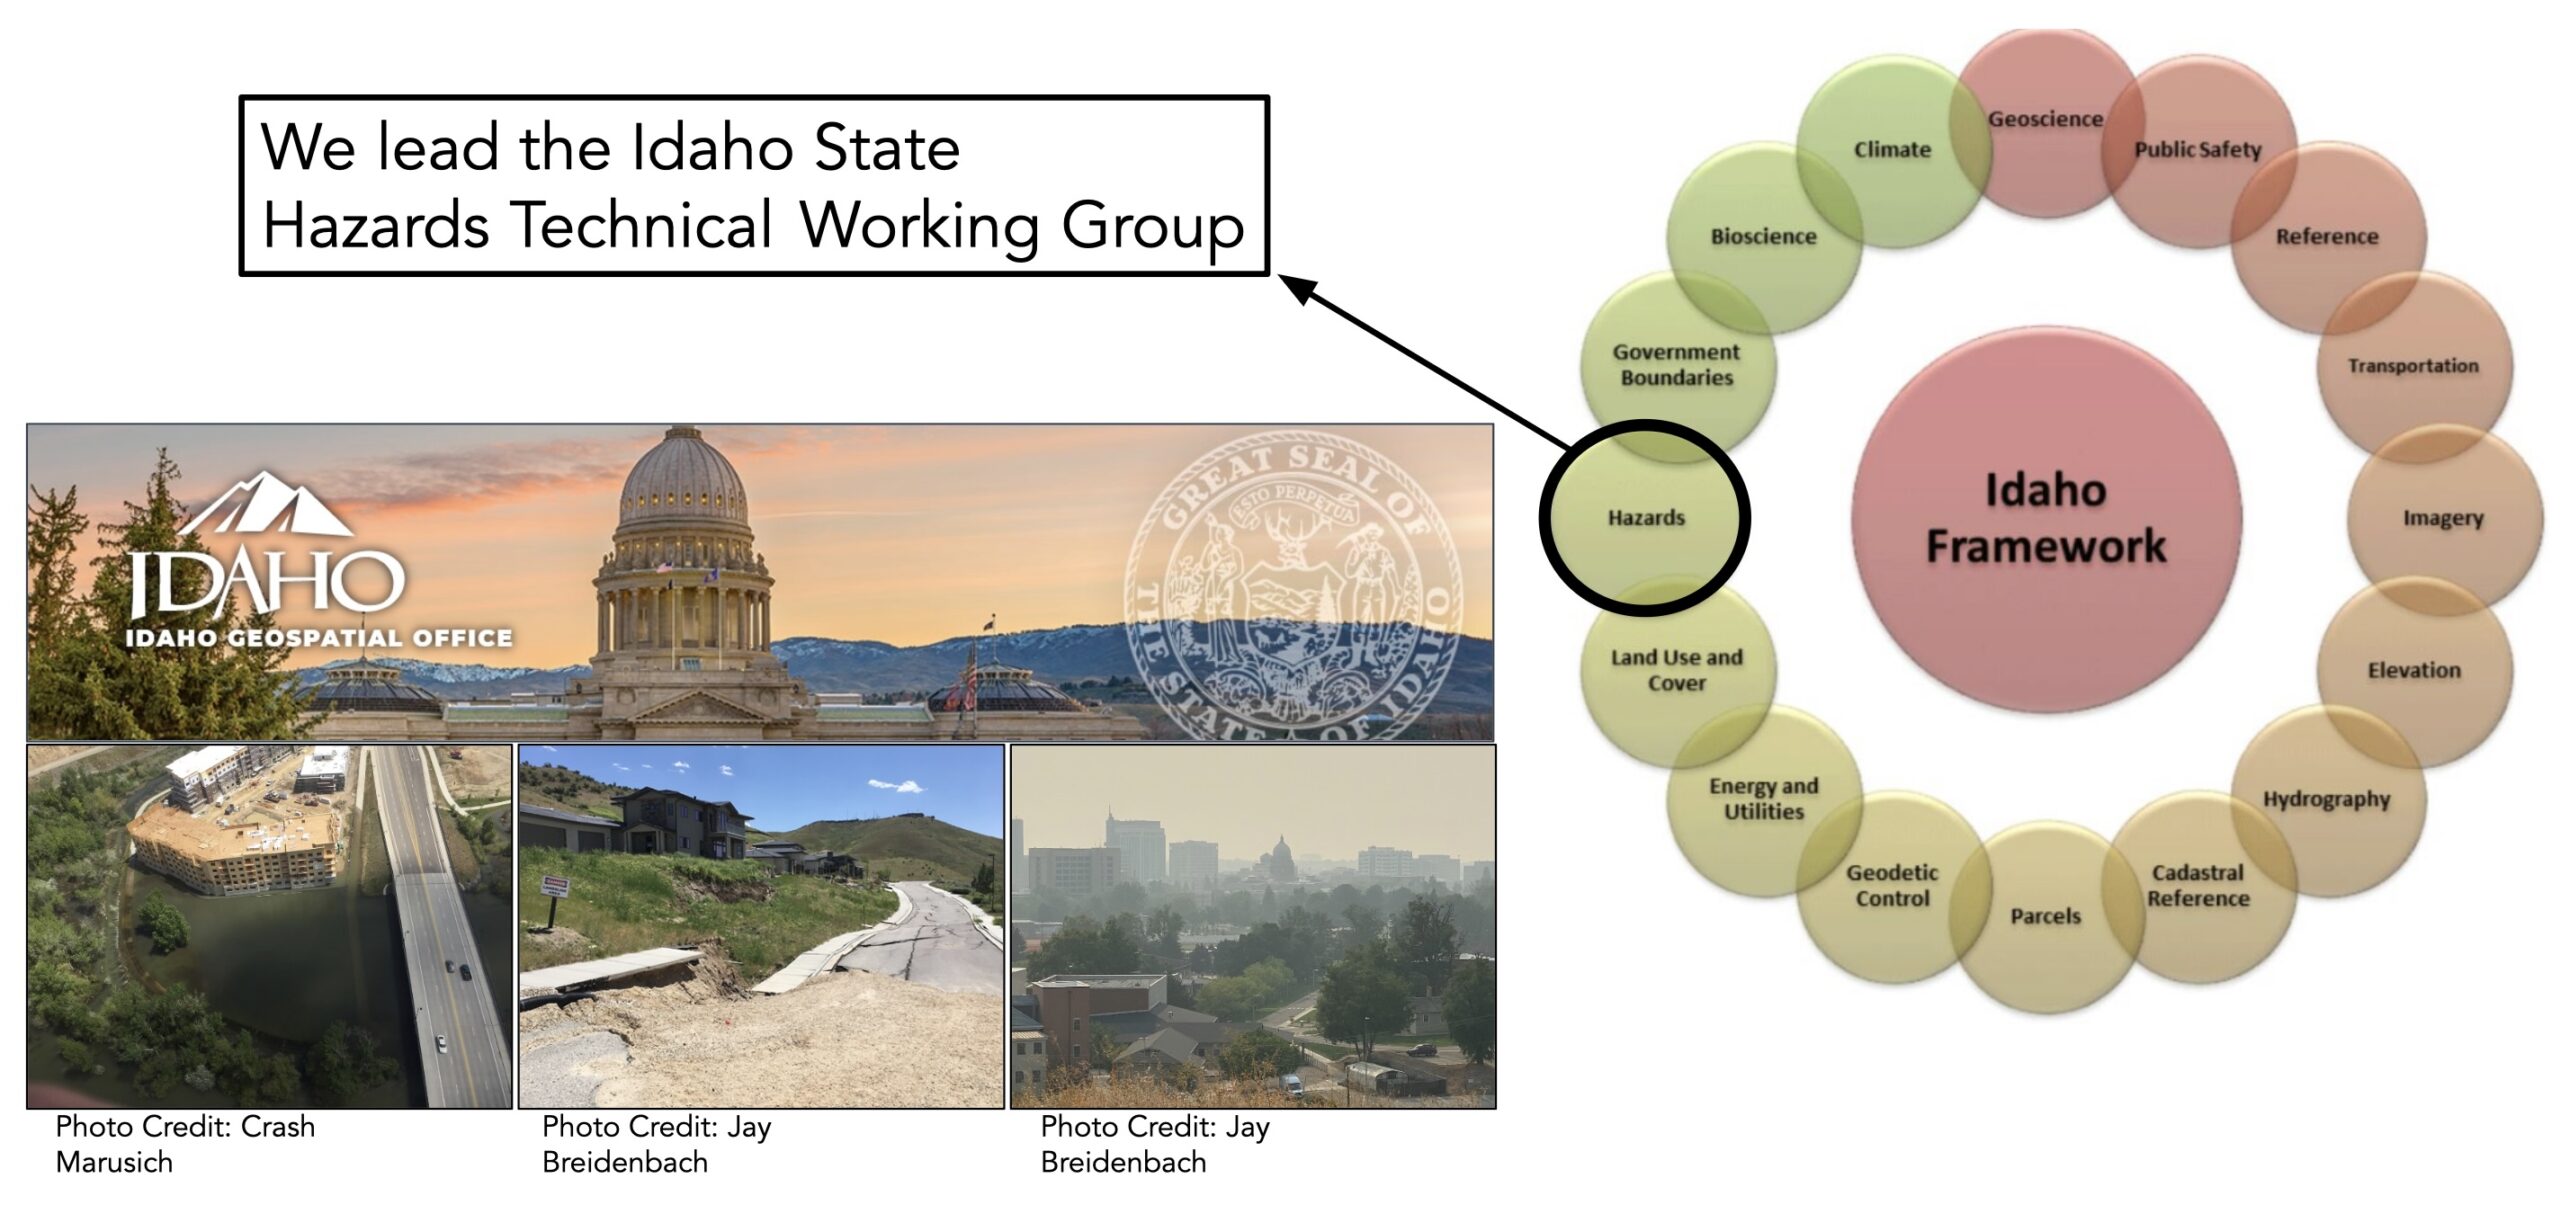 a circular diagram of the Idaho State Hazards Technical Working Group